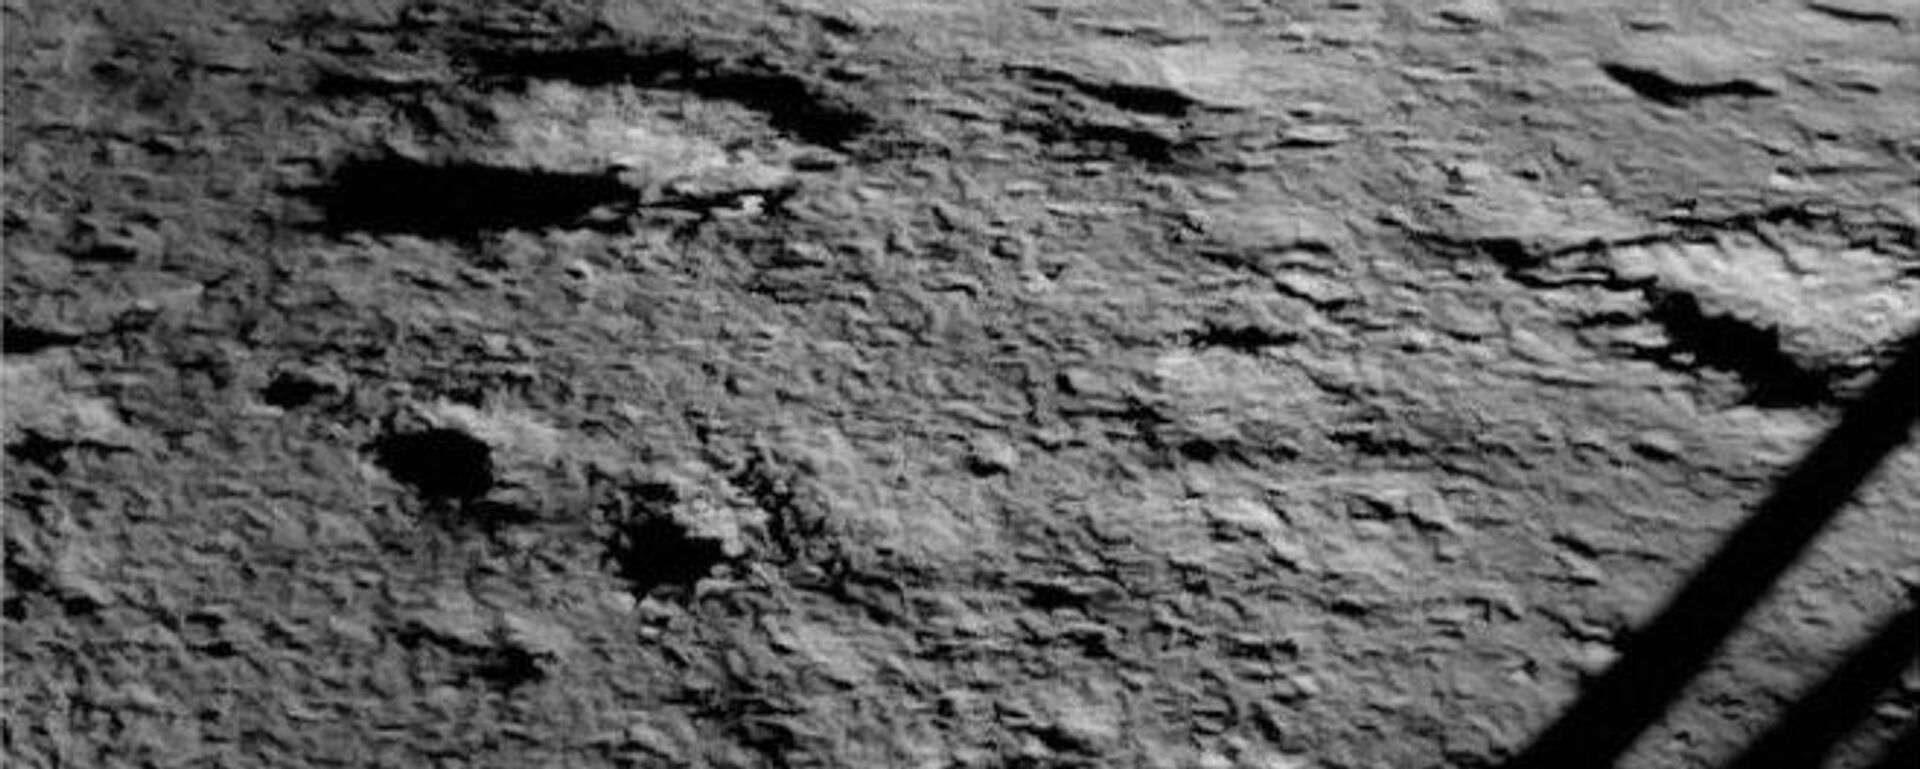 Chandrayaan-3 Lander on the lunar surface after landing on the Moon's South Pole, August 23, 2023 - Sputnik International, 1920, 24.08.2023